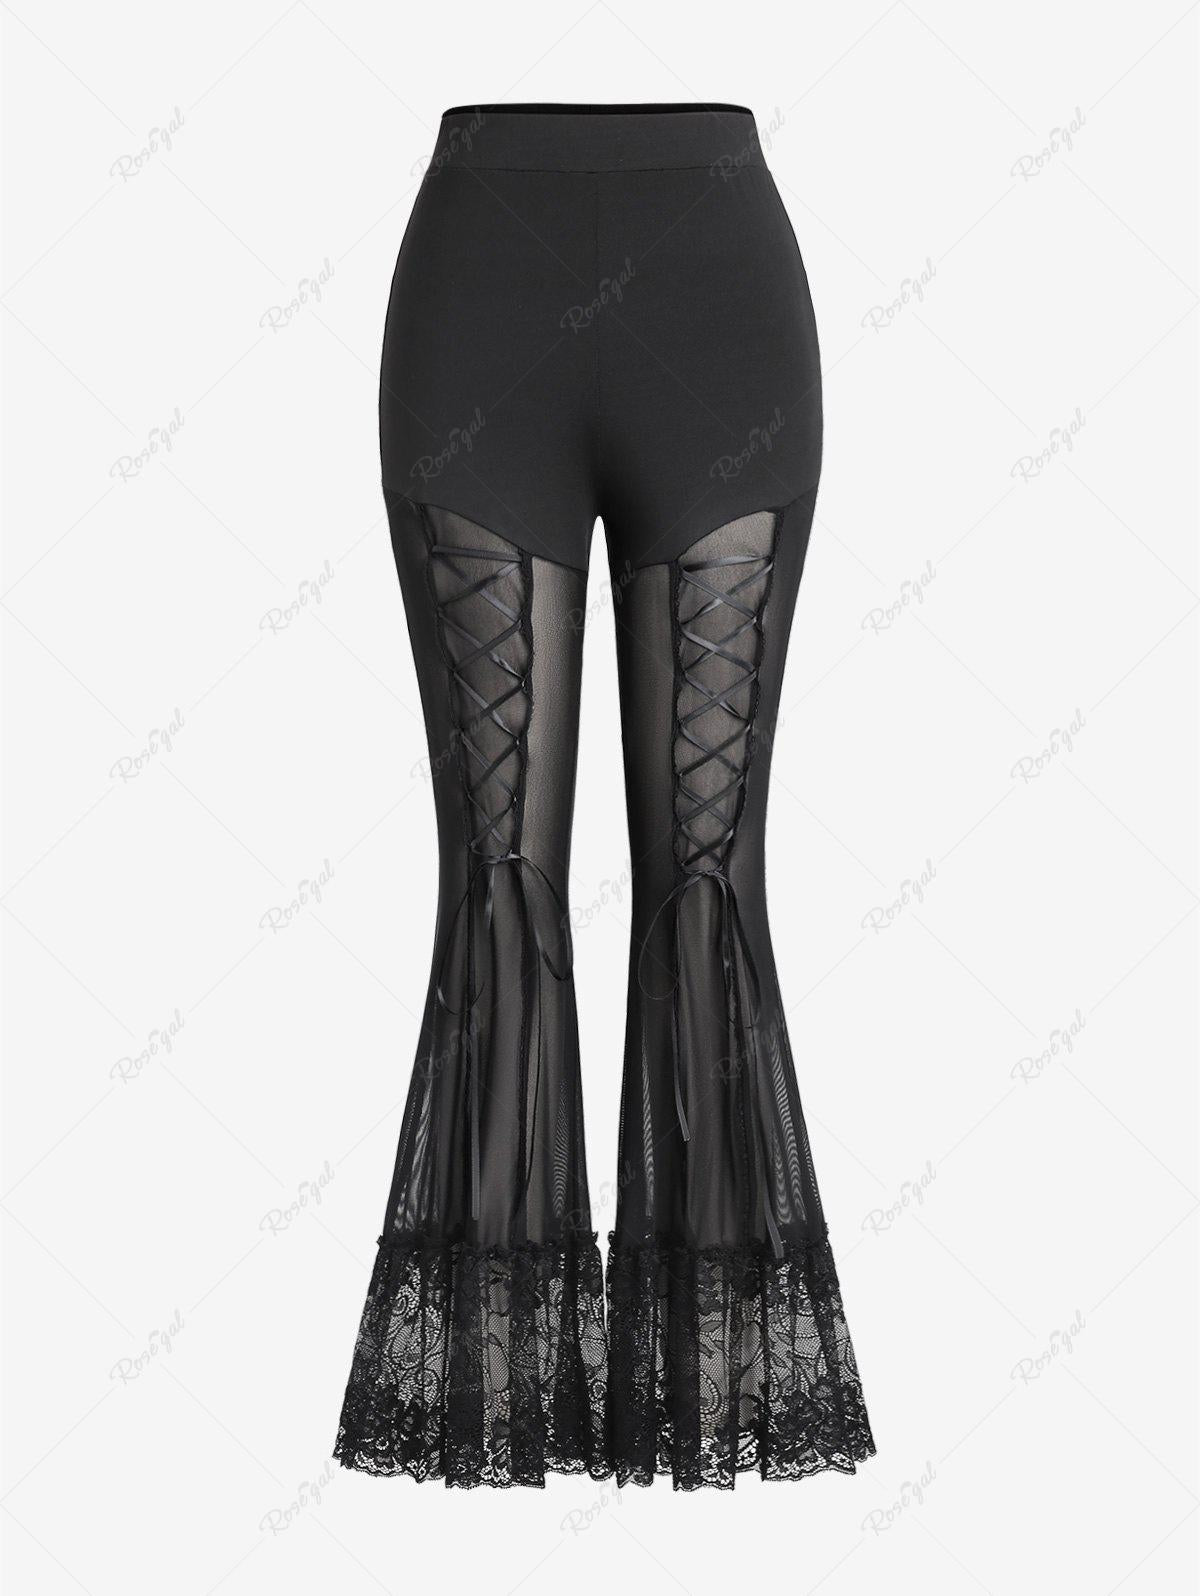 💗Johana Loves💗 Gothic See Through Mesh Panel Lace Lace-up Flare